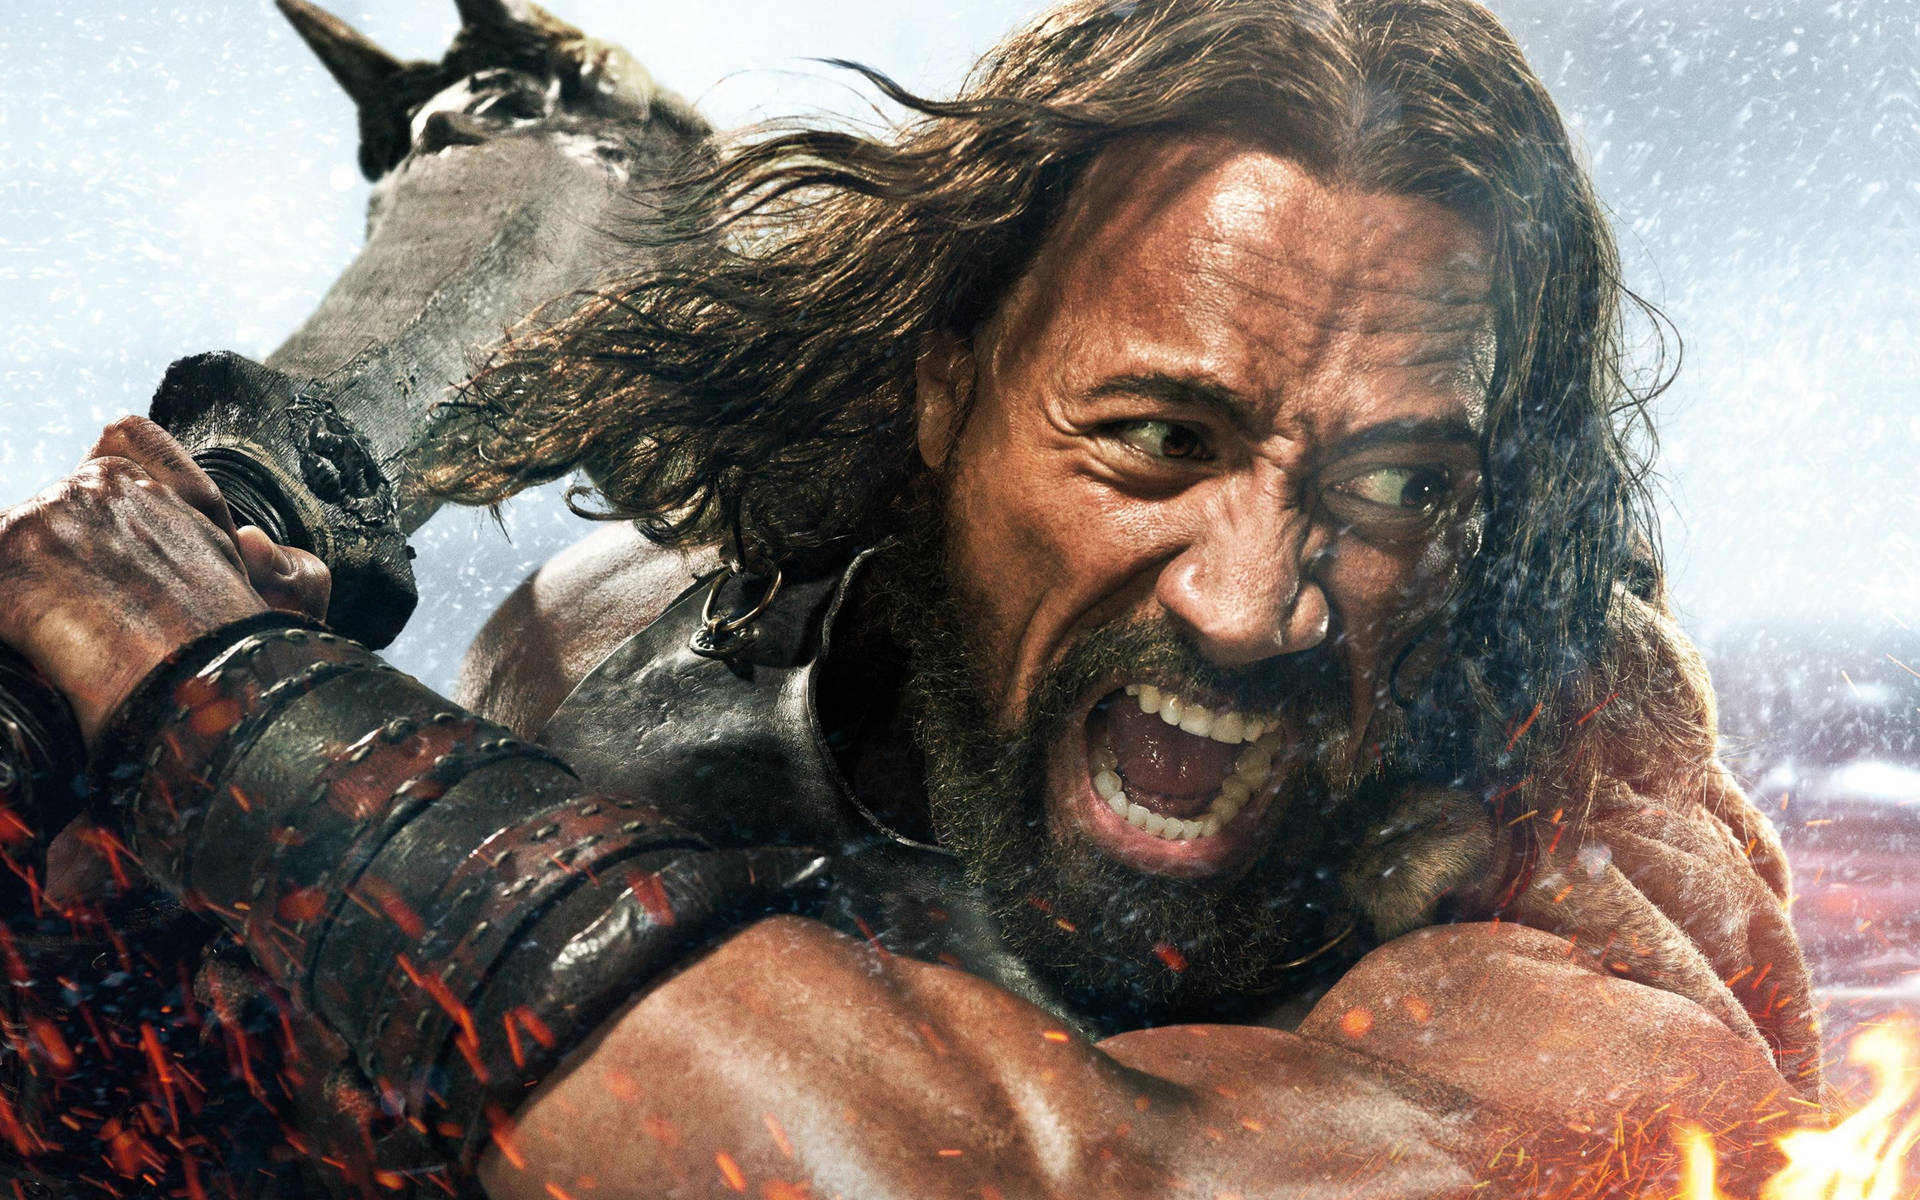 Dwayne Johnson In Character As Hercules, Displaying His Formidable Physique And Intense Expression.